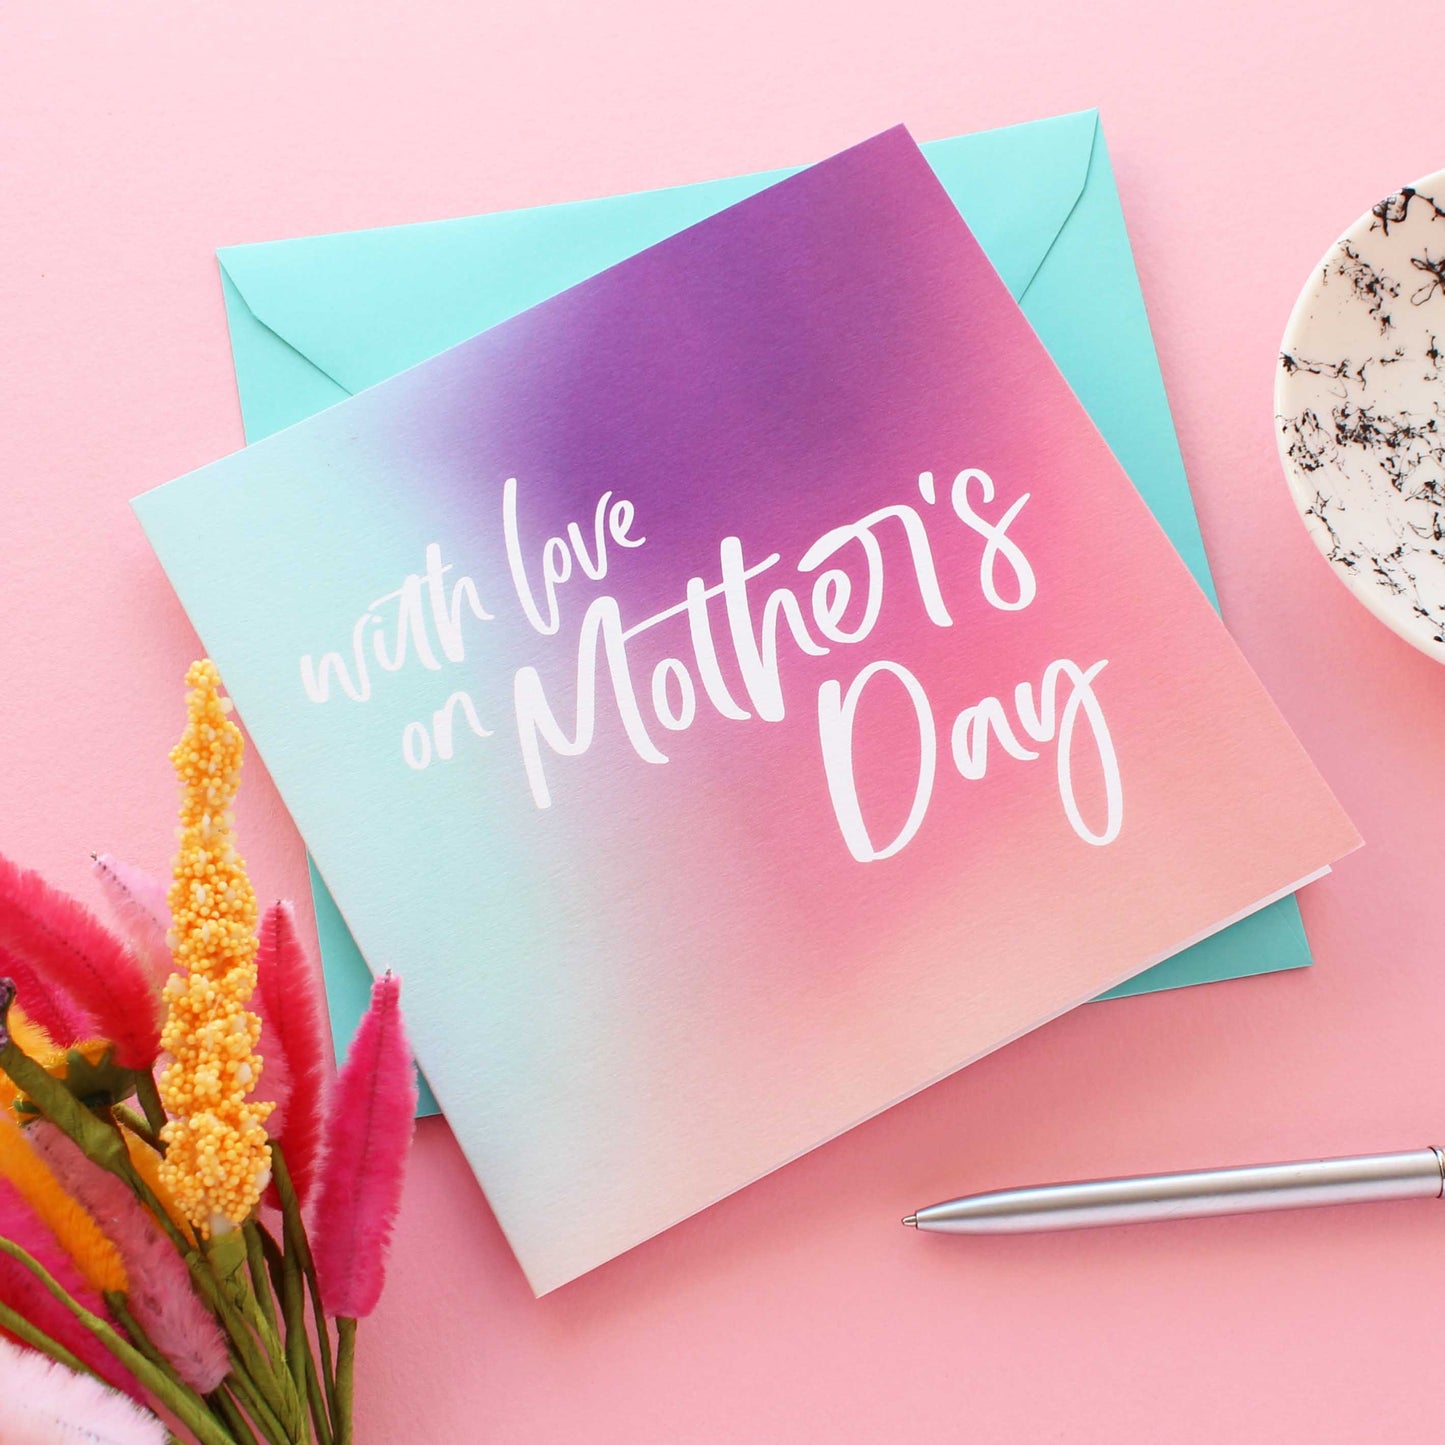 With love on Mother's Day card from Purple Tree Designs